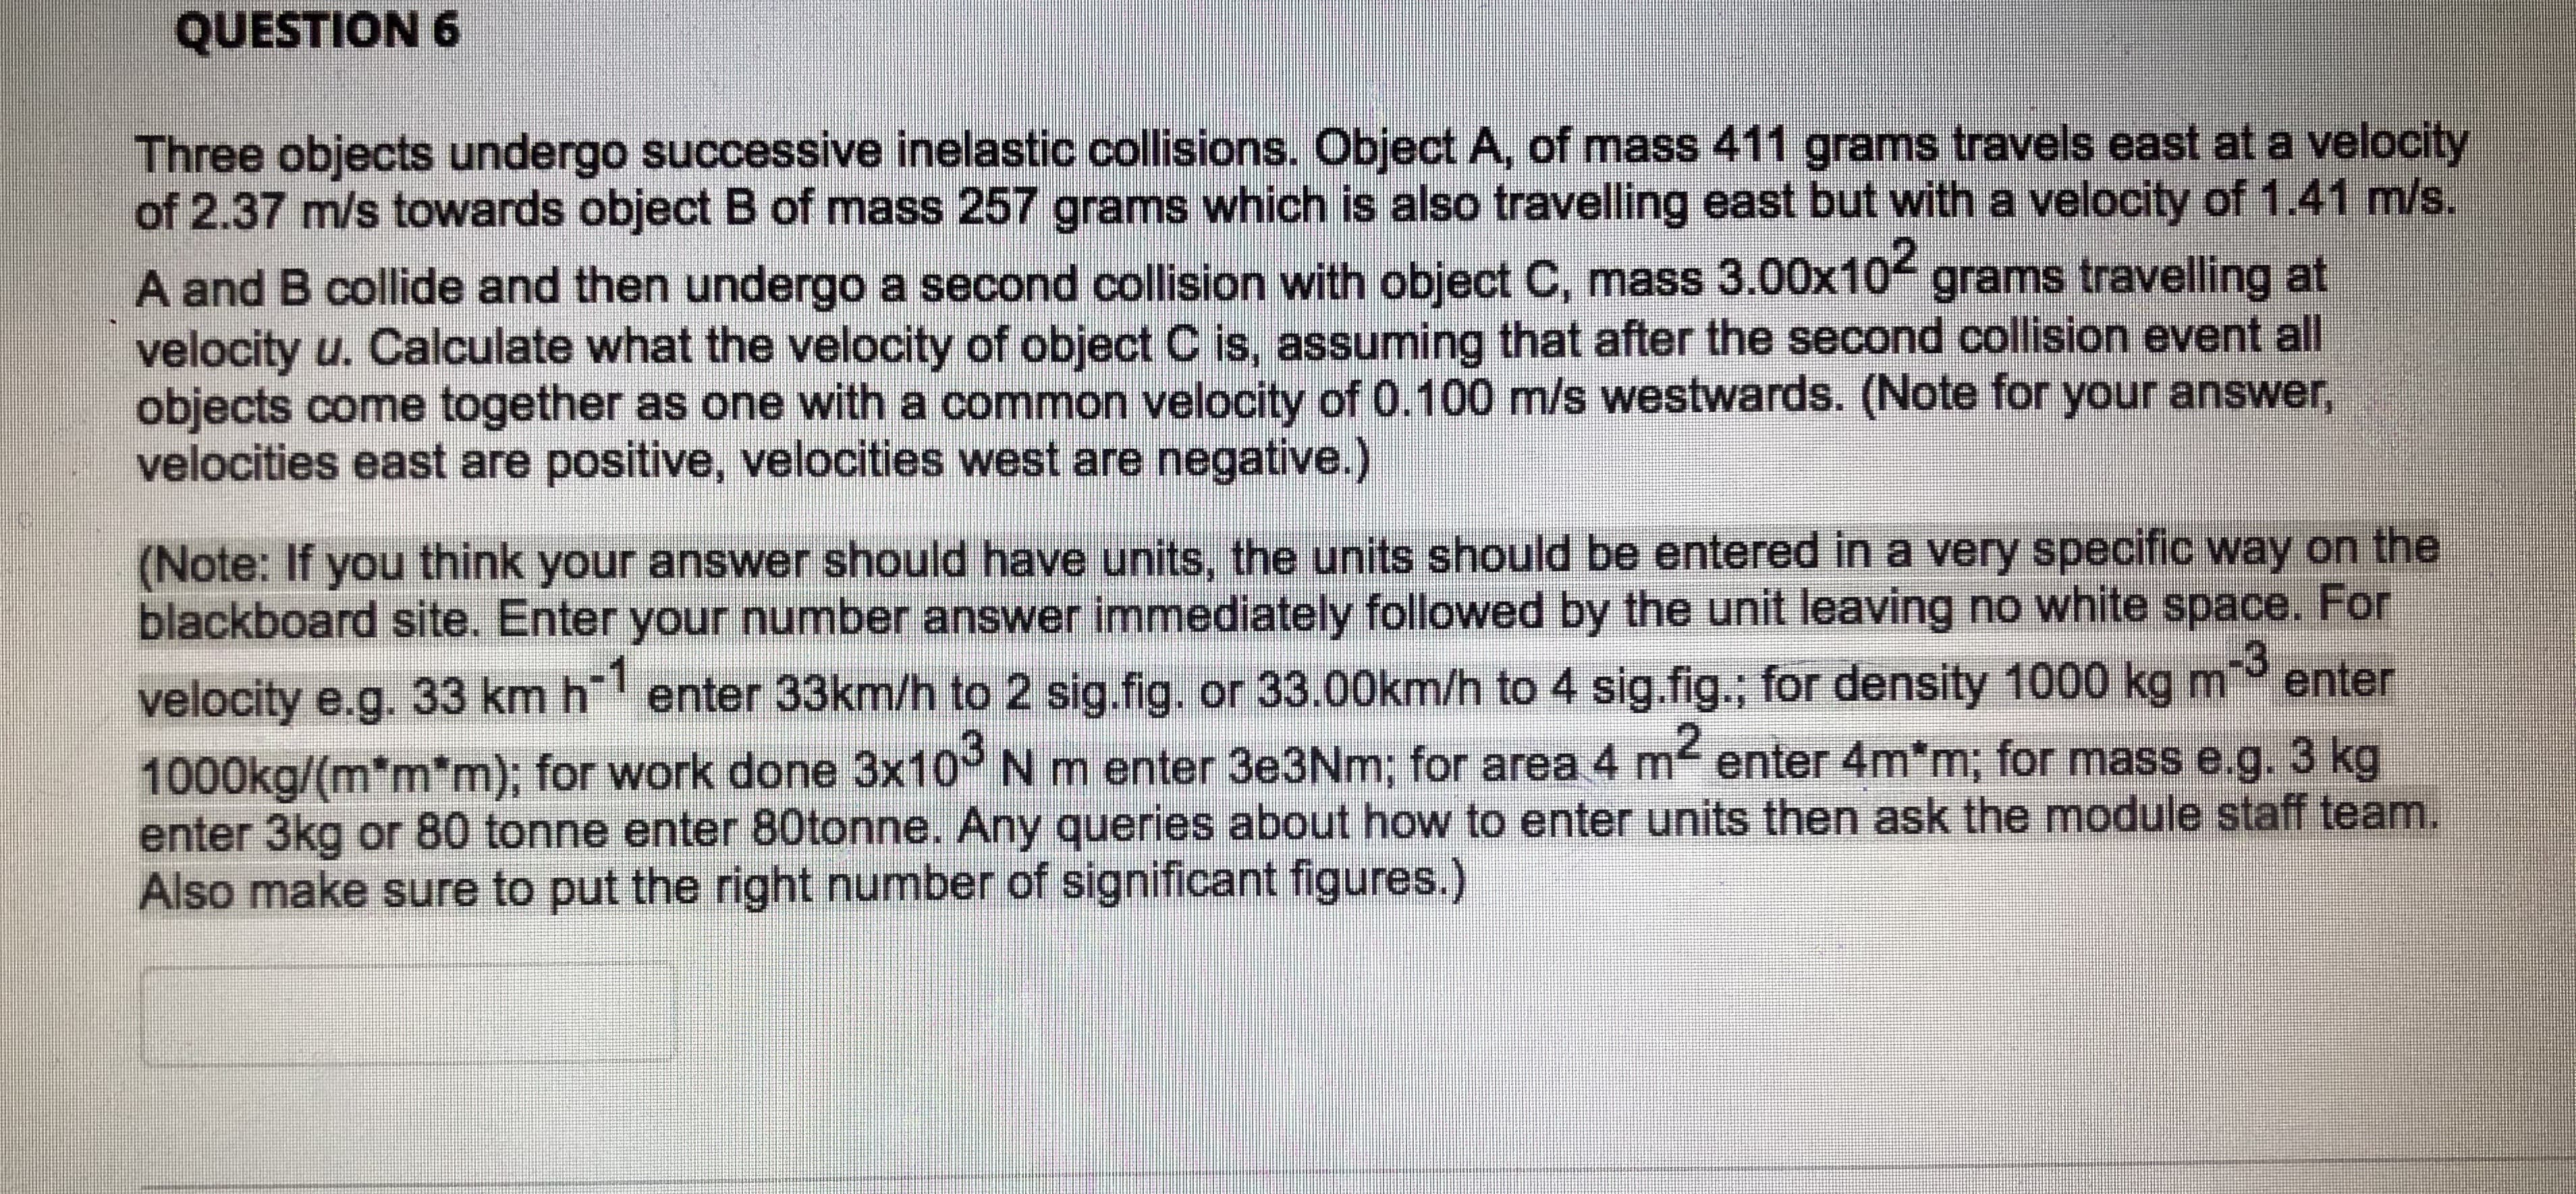 Three objects undergo successive inelastic collisions. Object A, of mass 411 grams travels east at a velocity
of 2.37 m/s towards object B of mass 257 grams which is also travelling east but with a velocity of 1.41 m/s.
A and B collide and then undergo a second collision with object C, mass 3.00x10 grams travelling at
velocity u. Calculate what the velocity of object C is, assuming that after the second collision event all
